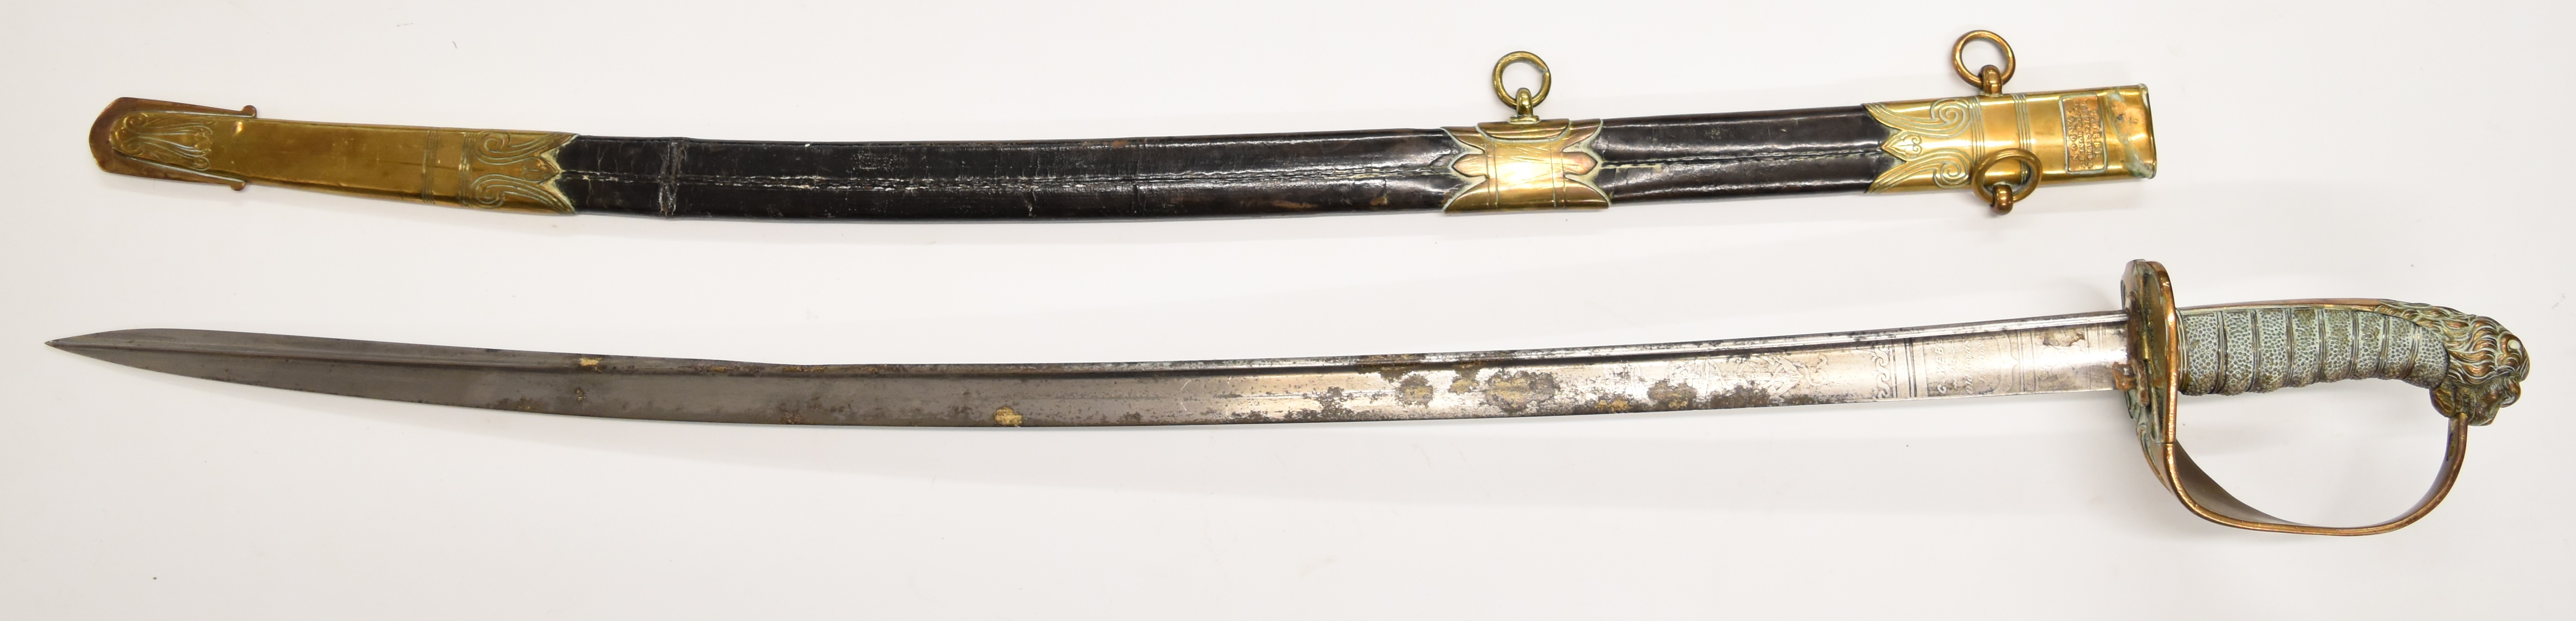 Royal Navy 1827 pattern sword with lion head pommel, folding inner guard and fouled anchor motif, - Image 2 of 11